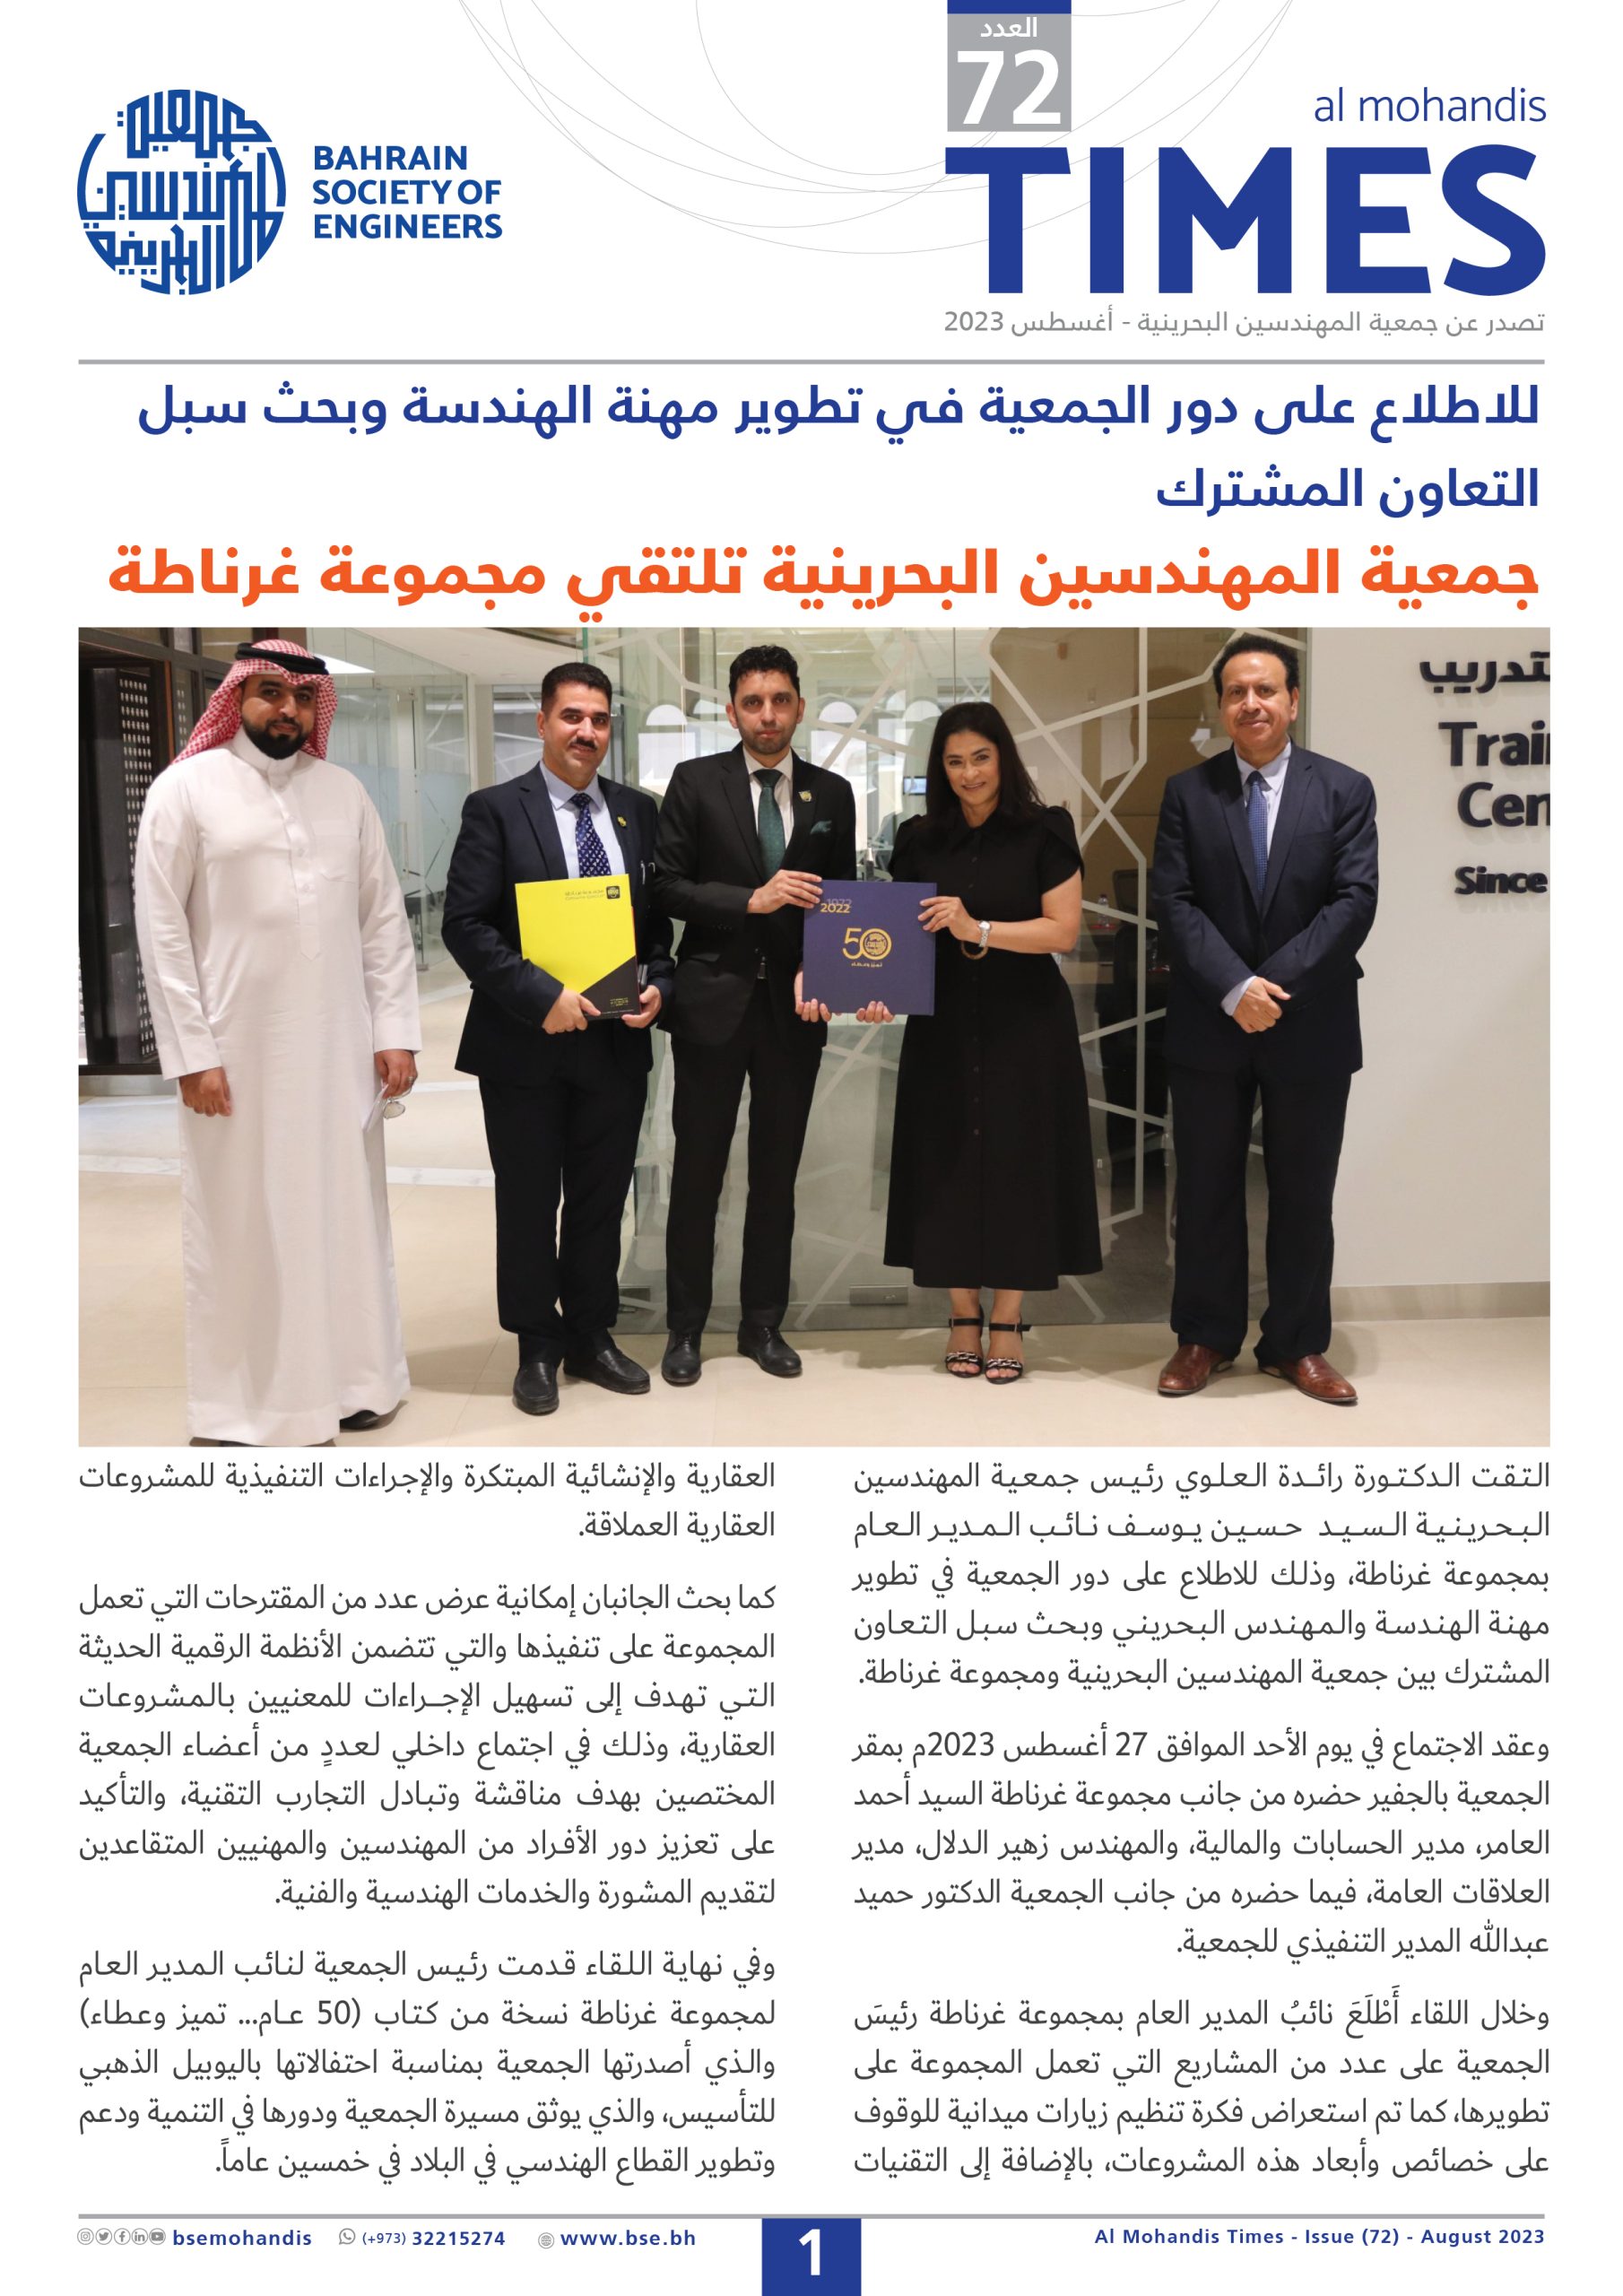 Al Mohandis Times Issue 72